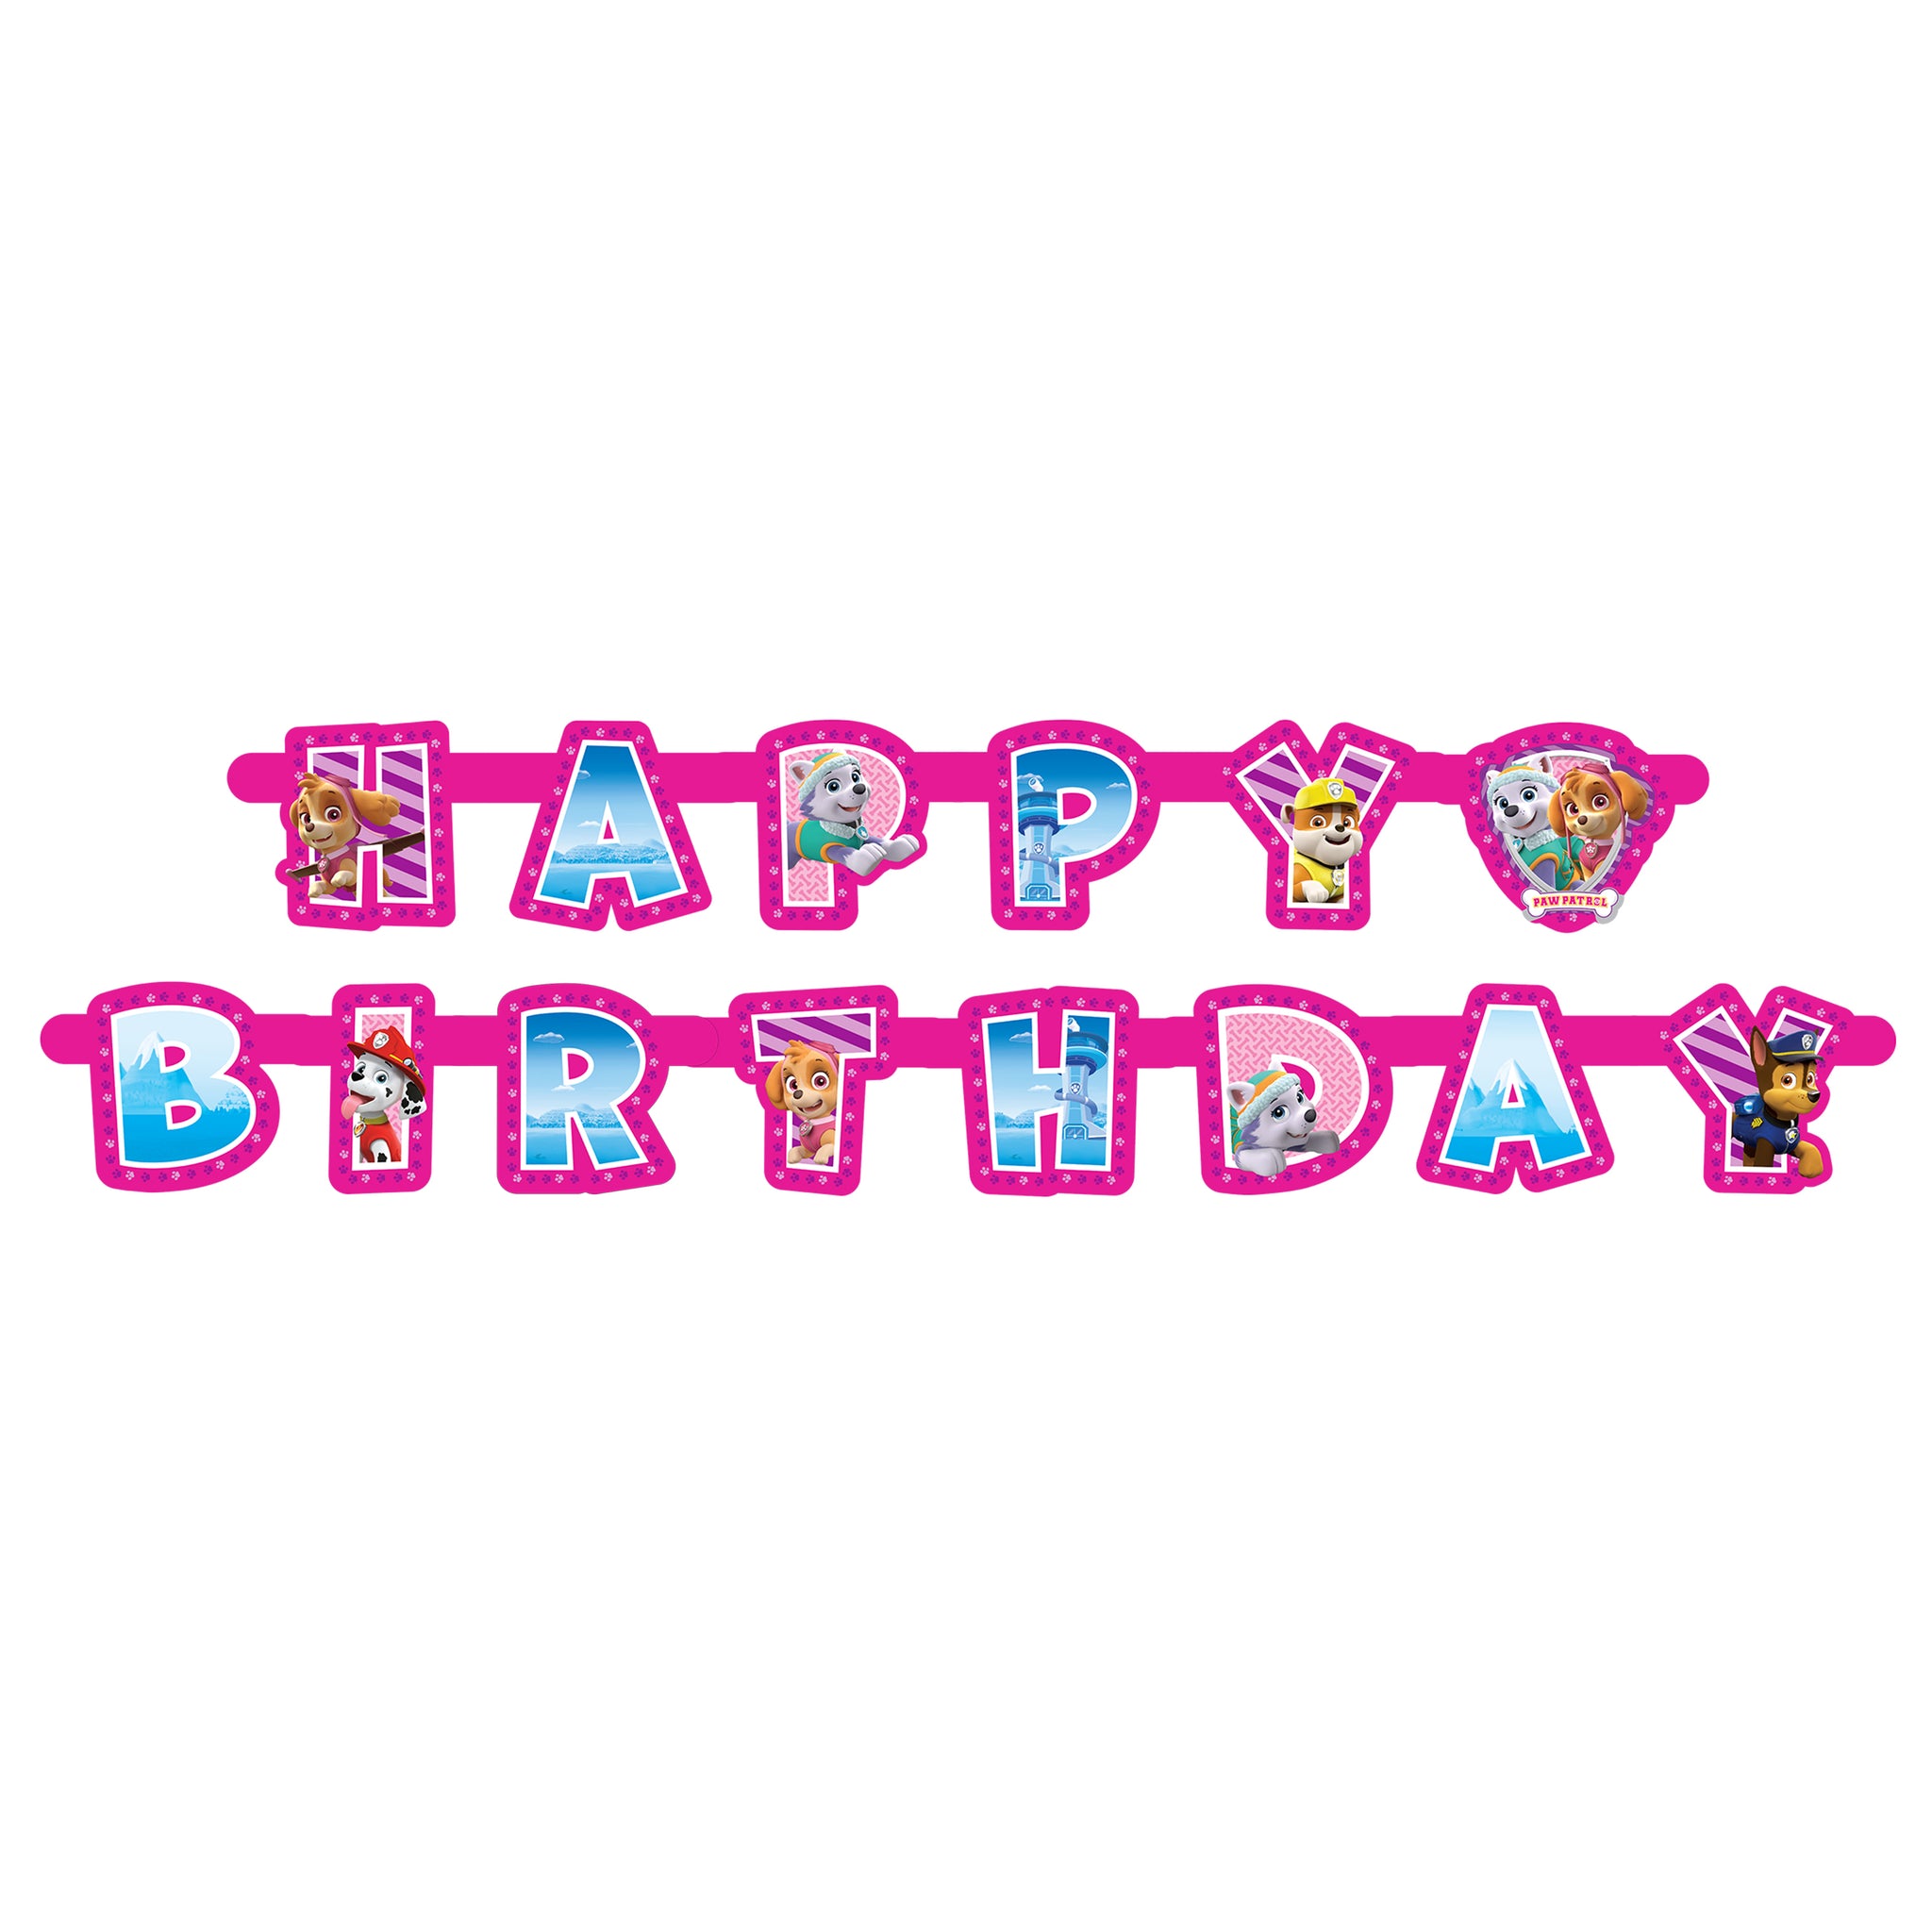 Supreme Clothing Logo Personalized Edible Cake Topper Image ABPID52047 – A  Birthday Place